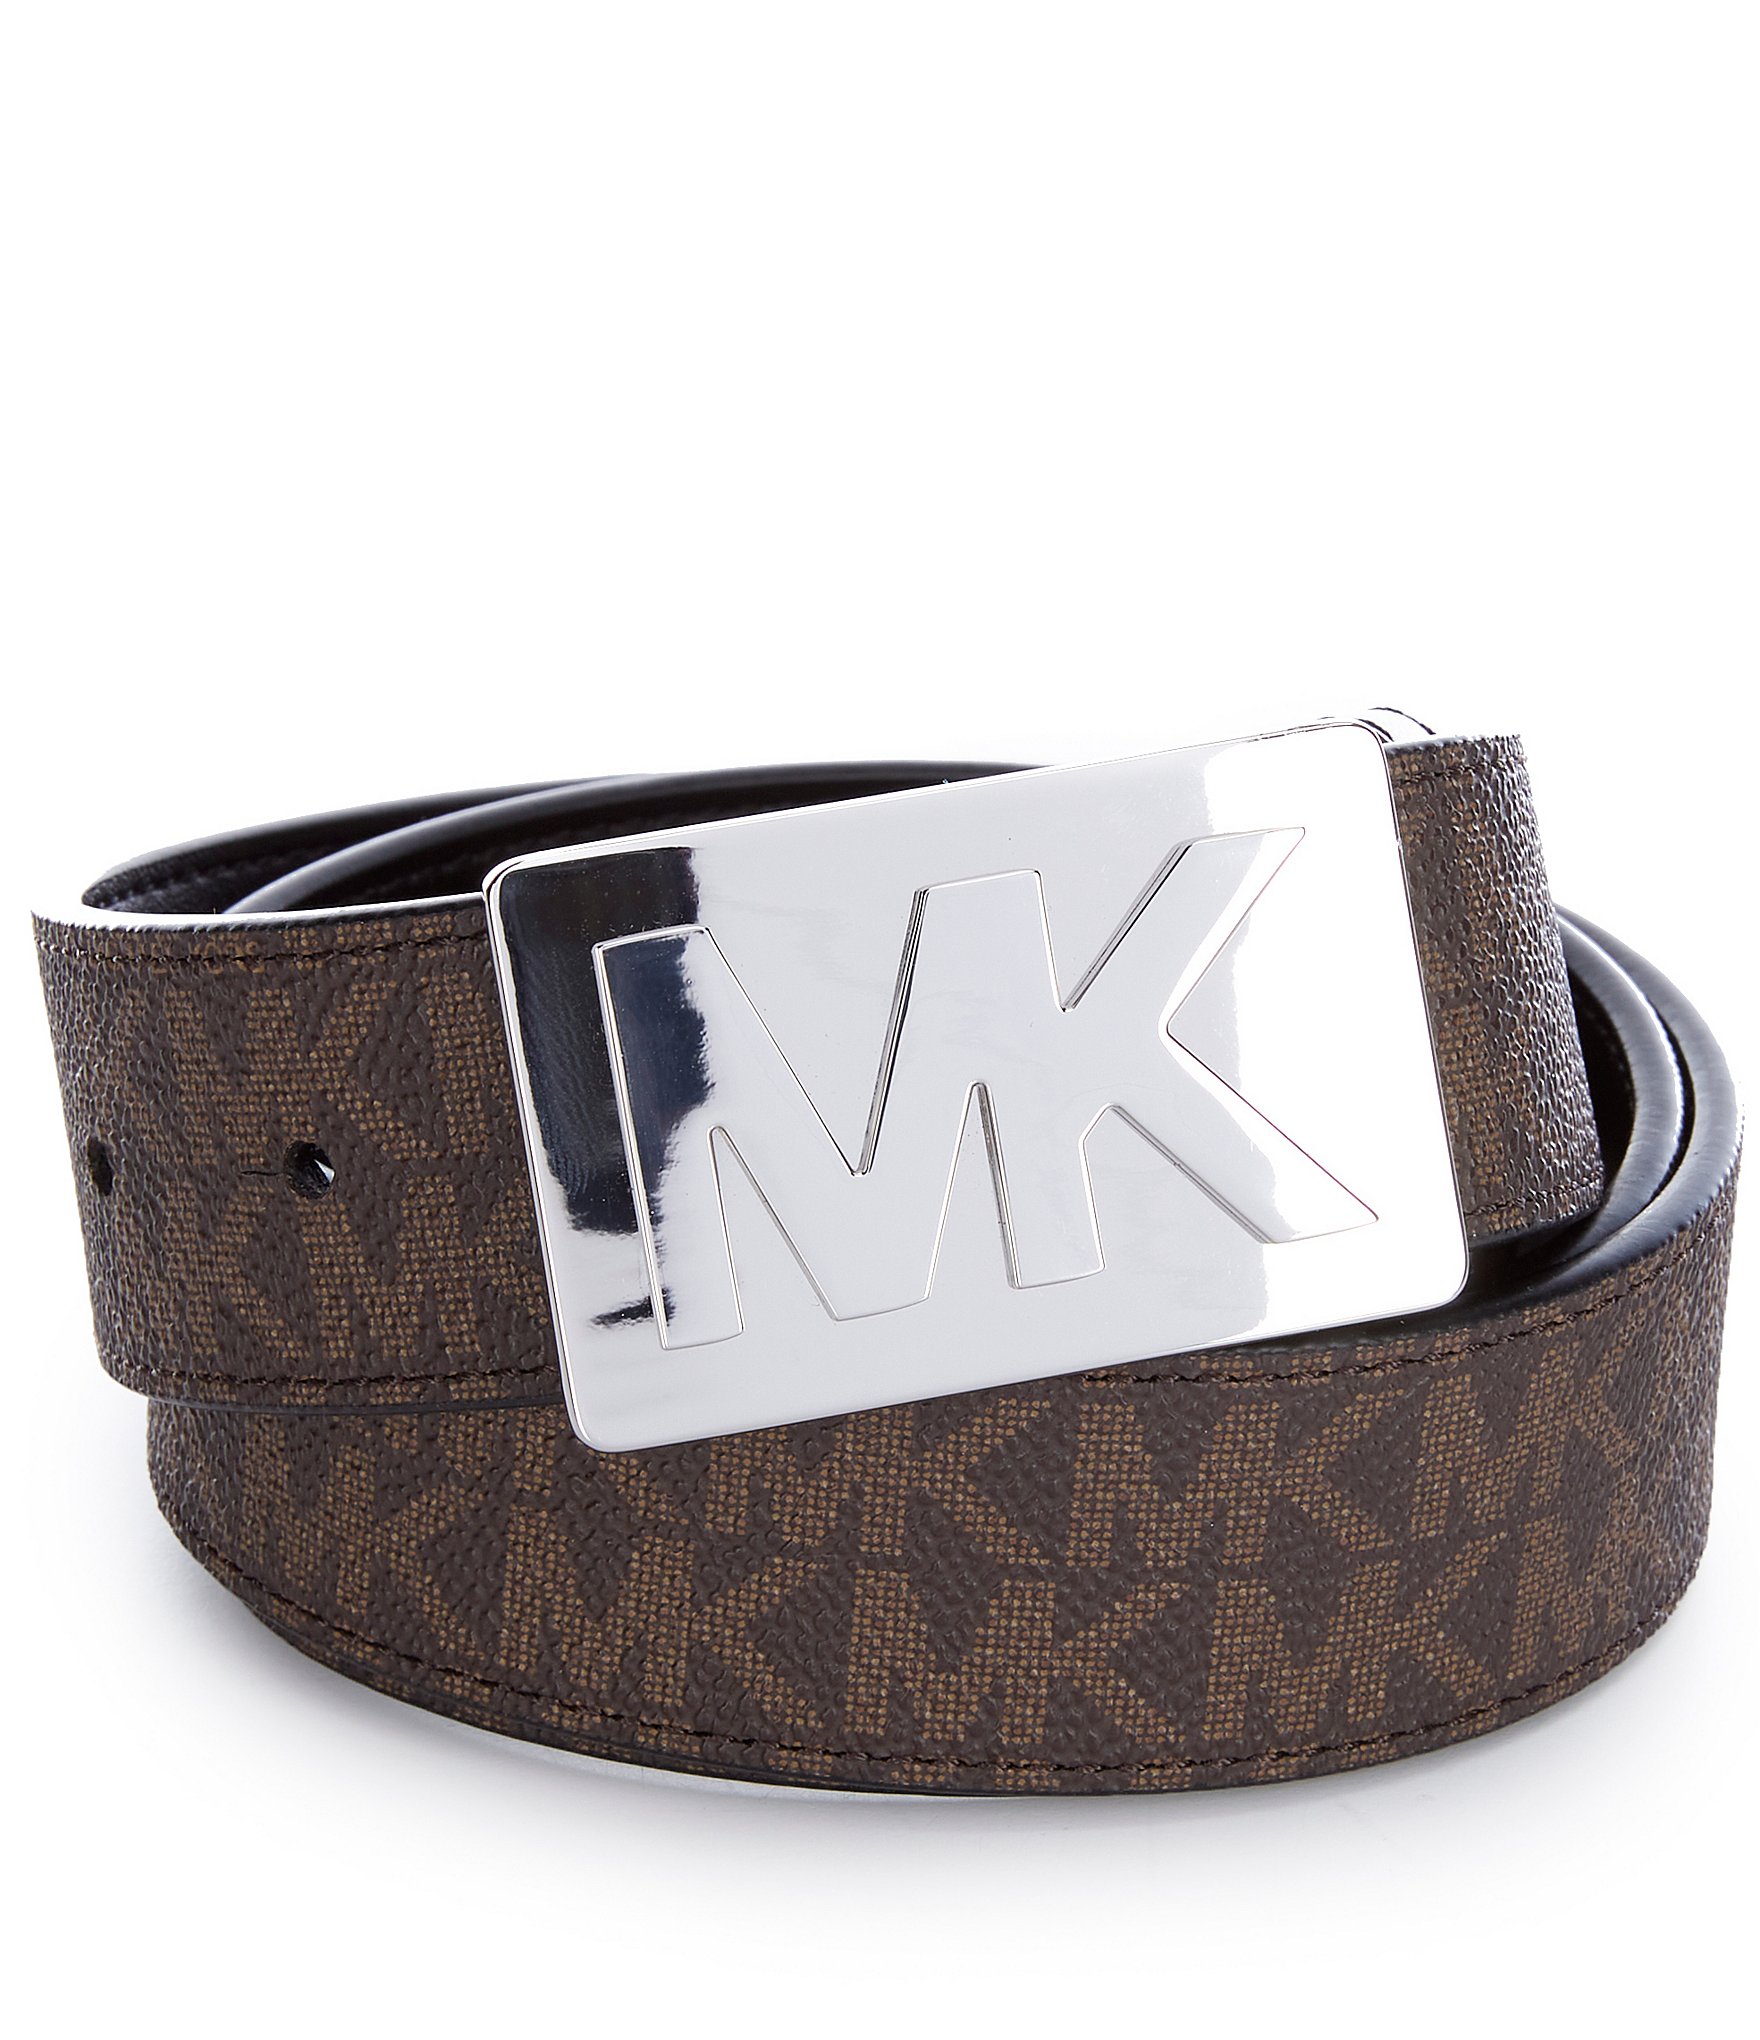 Michael Kors 38mm Leather Reversible MK Logo Plaque Buckle Belt  BrownBlack S at Amazon Womens Clothing store